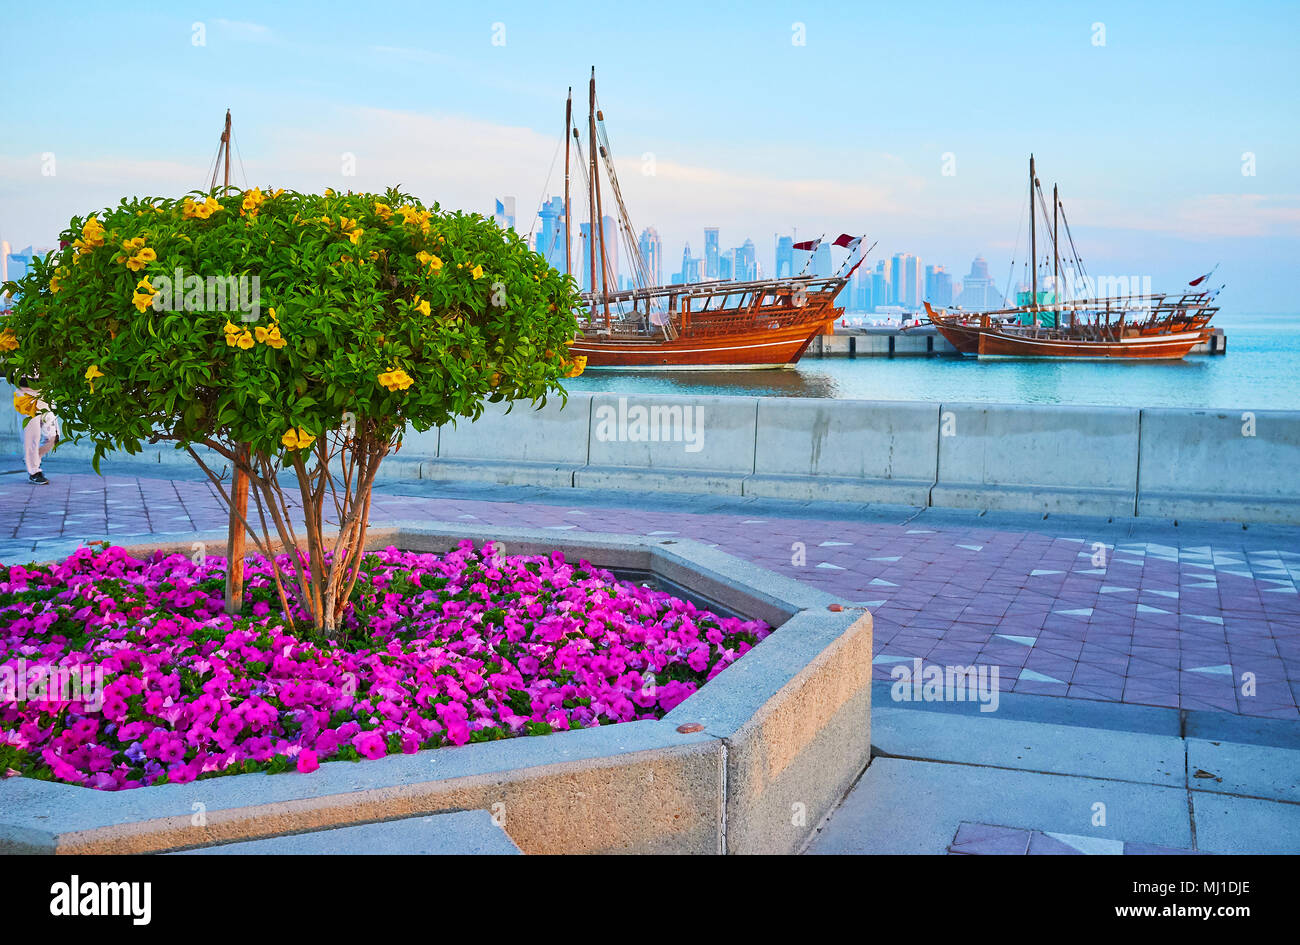 The bright flower beds and blooming trees on Corniche promenade of Doha, the old dhow boats are seen on background, Qatar. Stock Photo